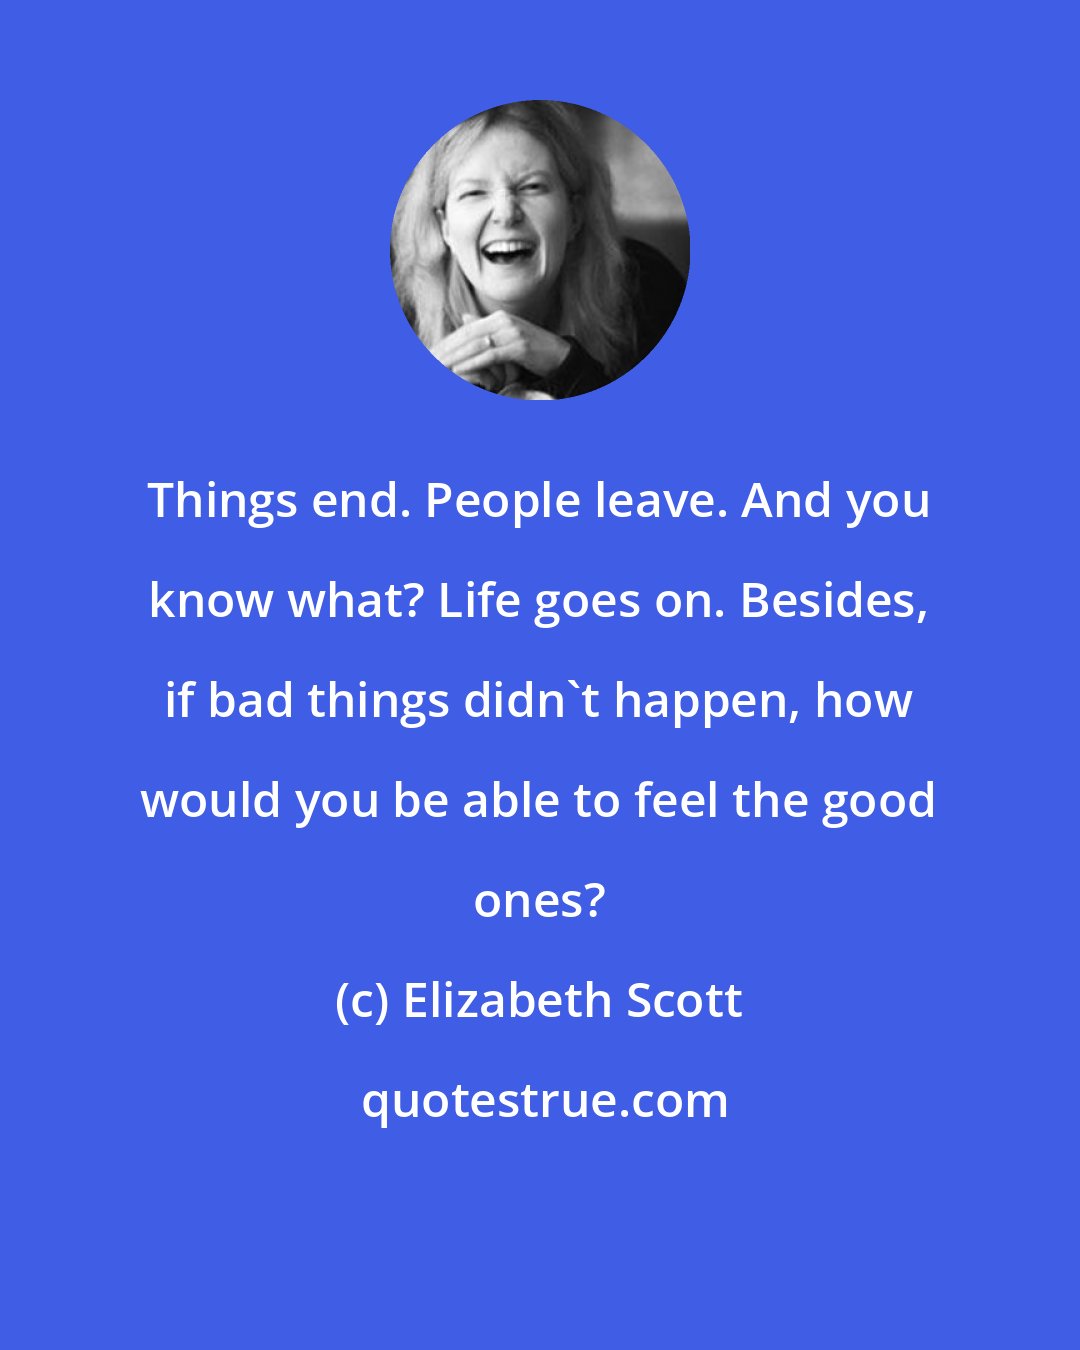 Elizabeth Scott: Things end. People leave. And you know what? Life goes on. Besides, if bad things didn't happen, how would you be able to feel the good ones?